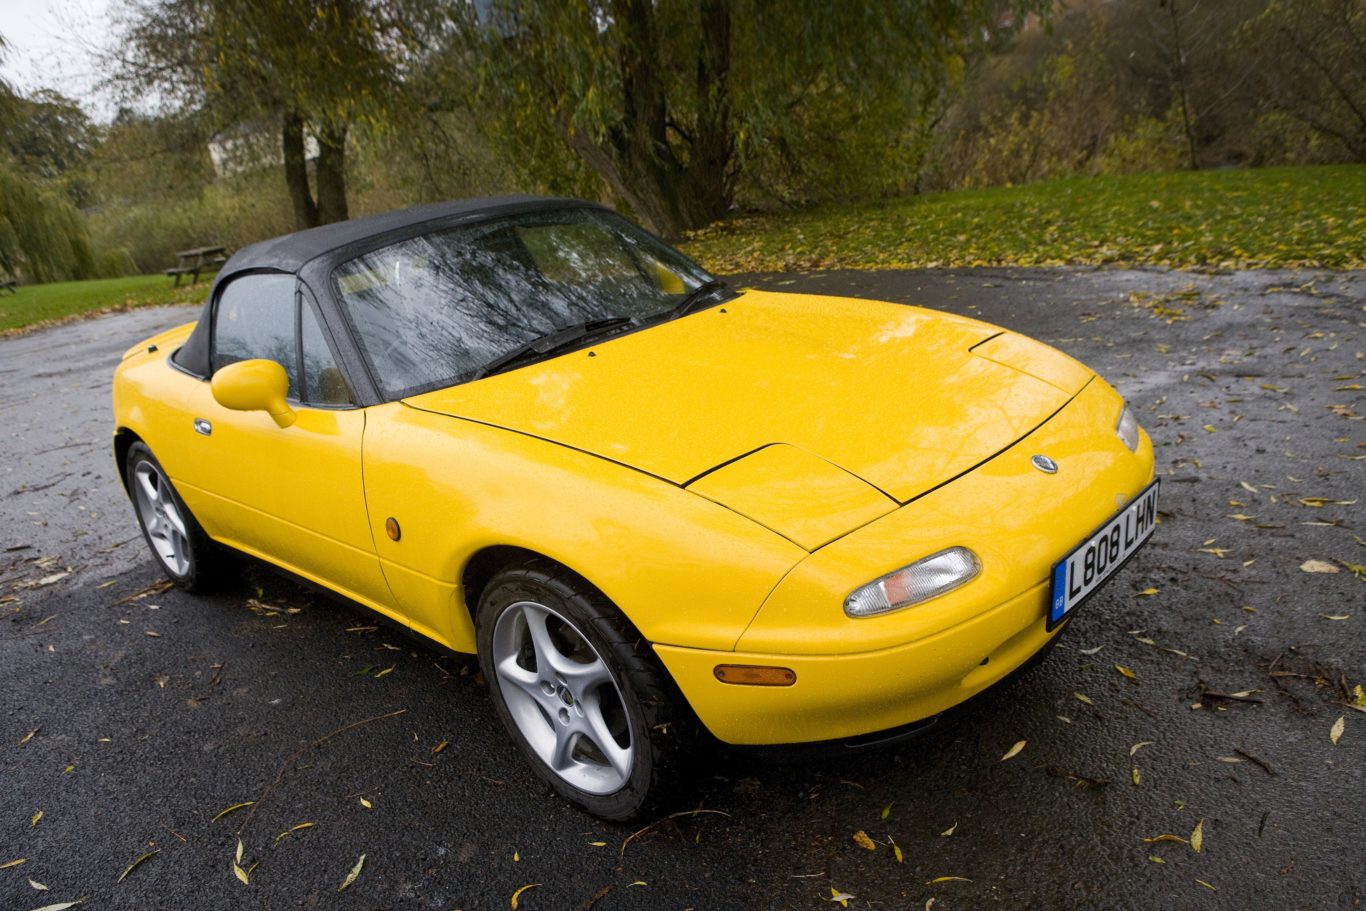 The Mazda MX-5 is a go-to low-cost drop-top